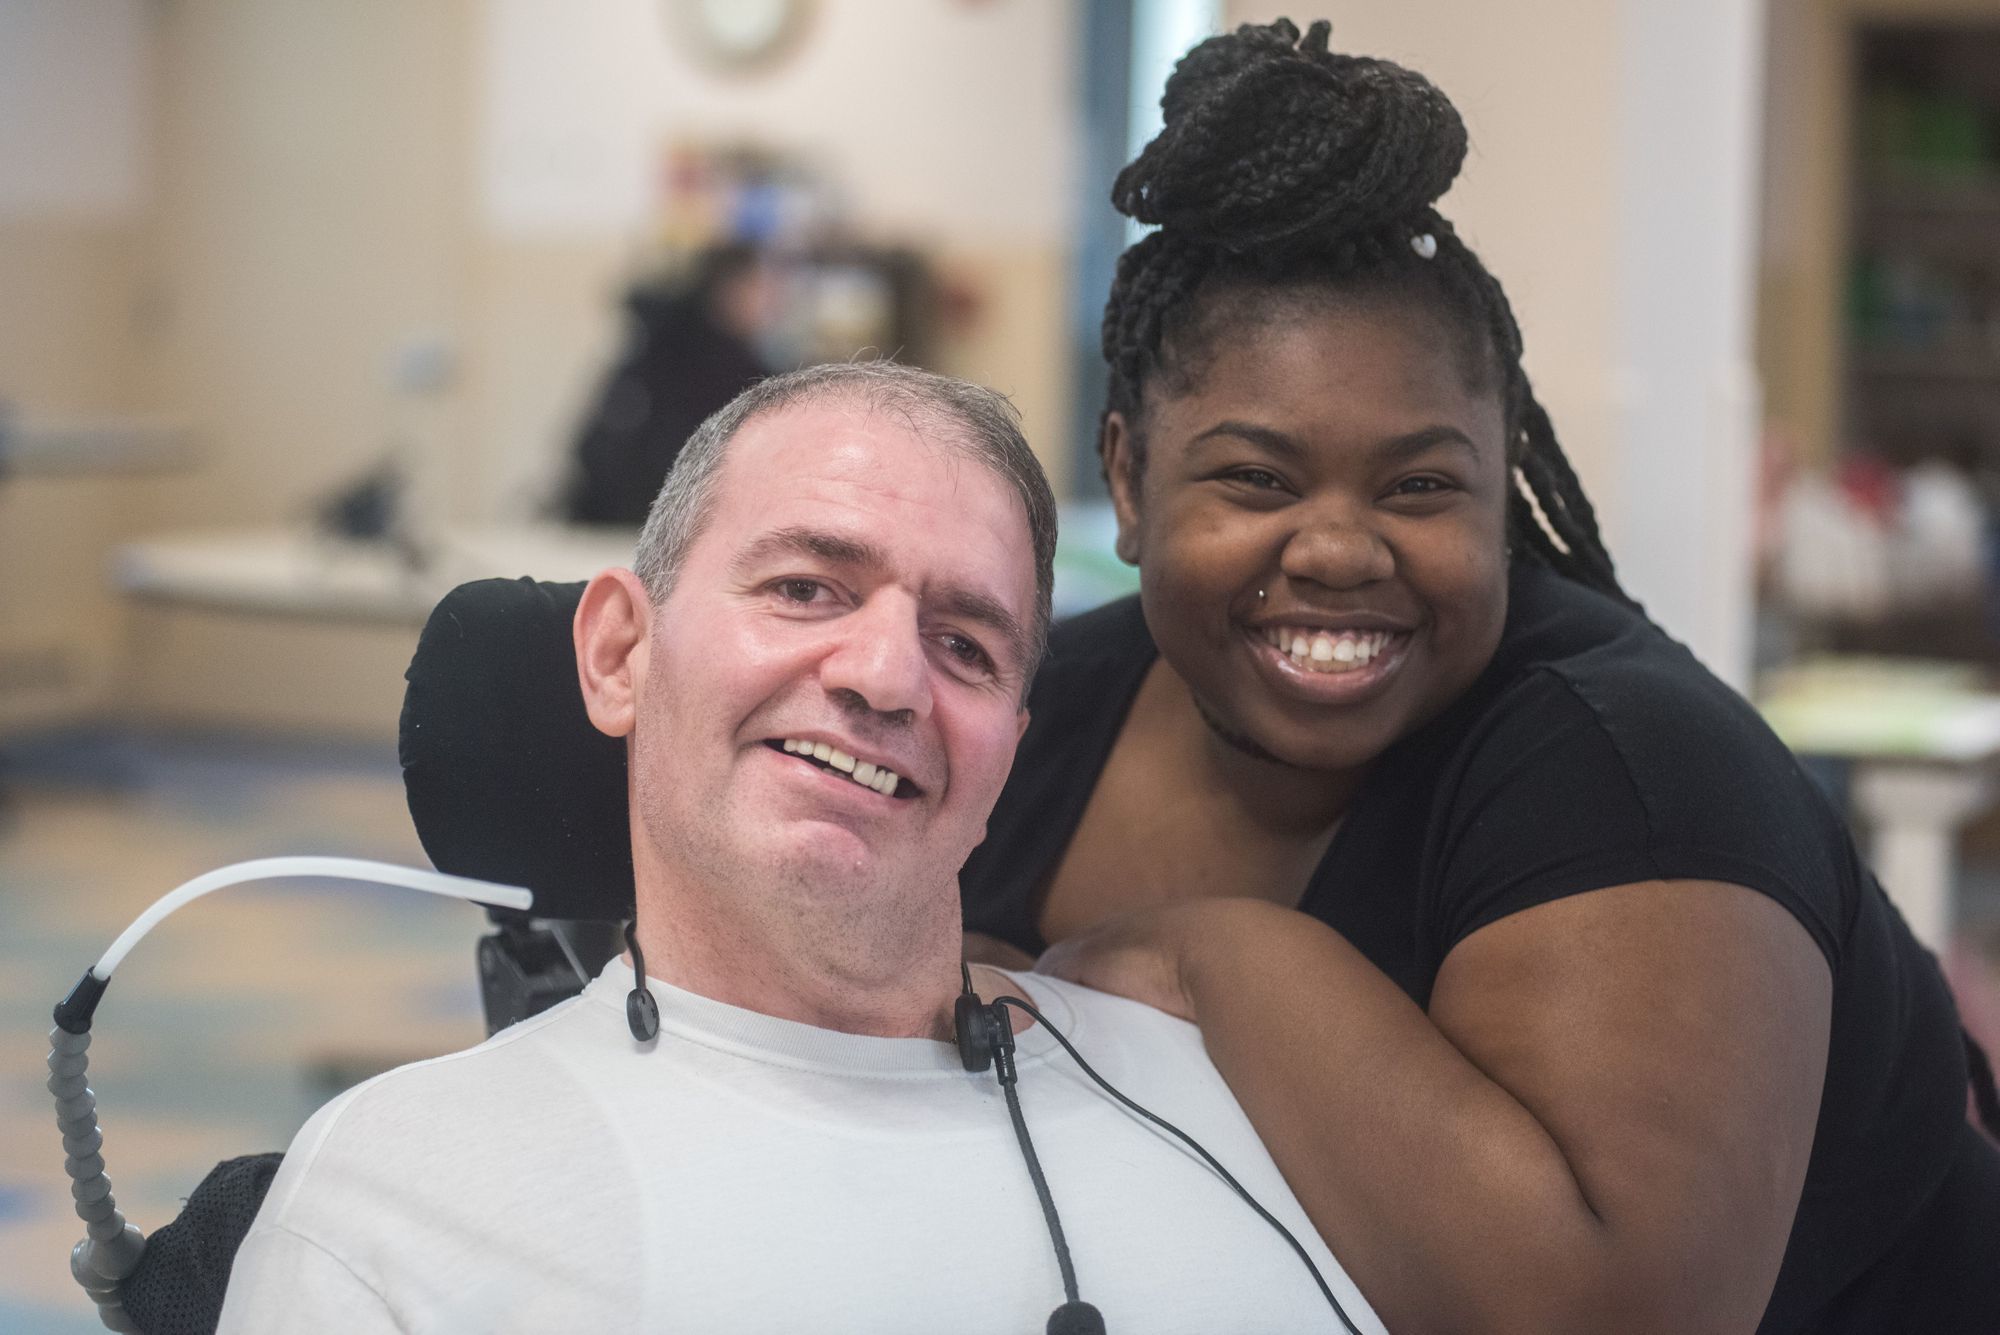 The Boston Home is excited to announce that AstraZeneca US will support our life enhancing programs for people with advanced disabilities as part of its 2023 ACT on #healthequity Community Solutions Challenge!